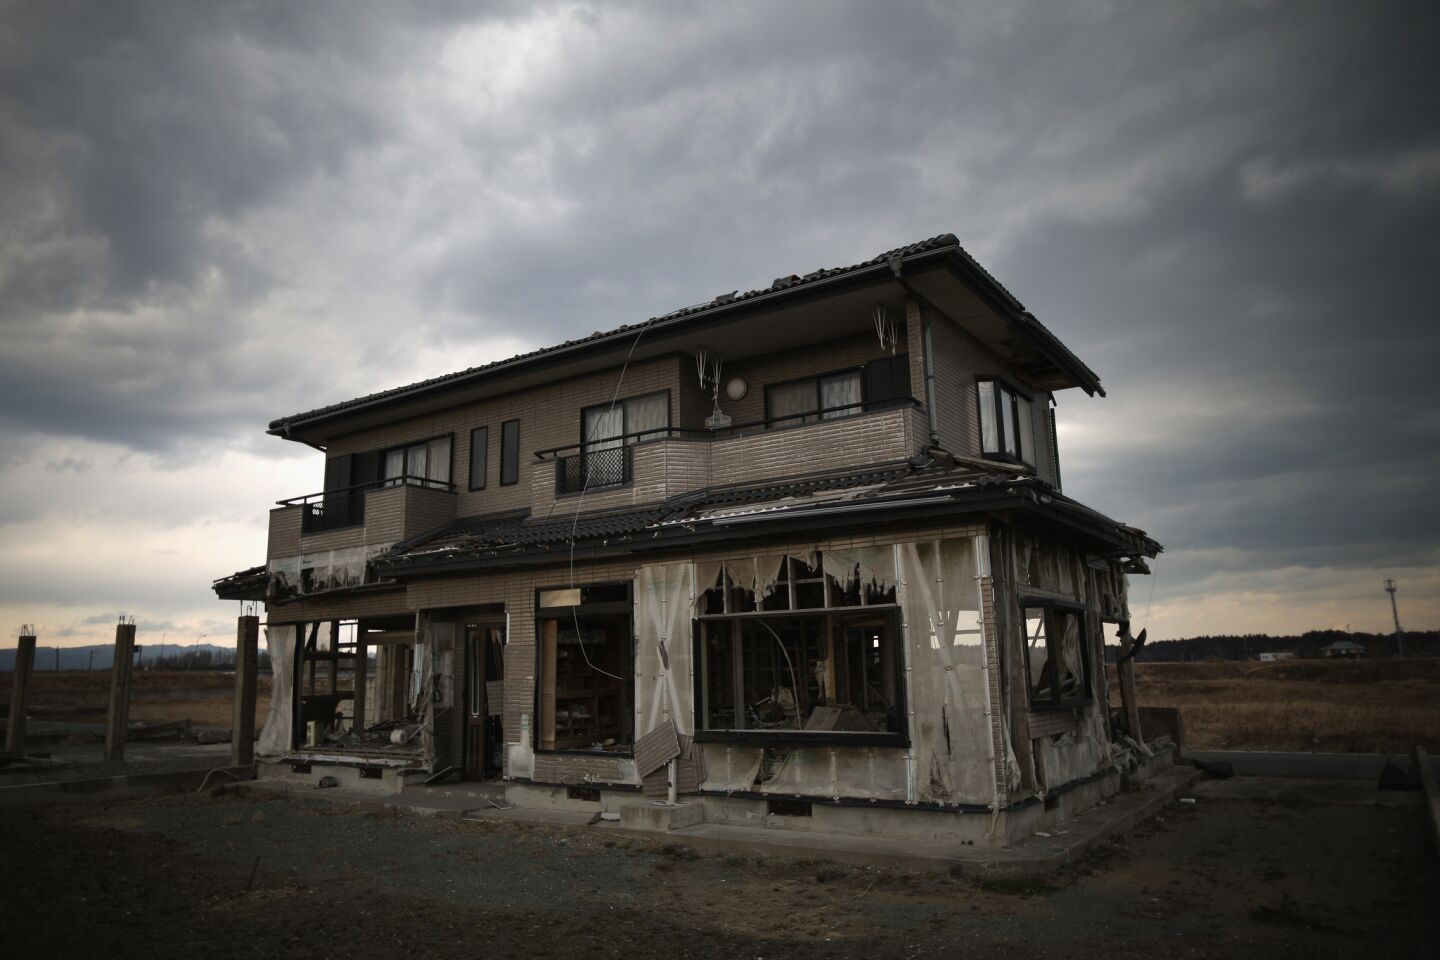 A house sits on the scarred landscape inside the exclusion zone close to the devastated Fukushima Daiichi nuclear power plant in Namie, Japan. The area is closed to residents because of radiation contamination from the Fukushima nuclear disaster.